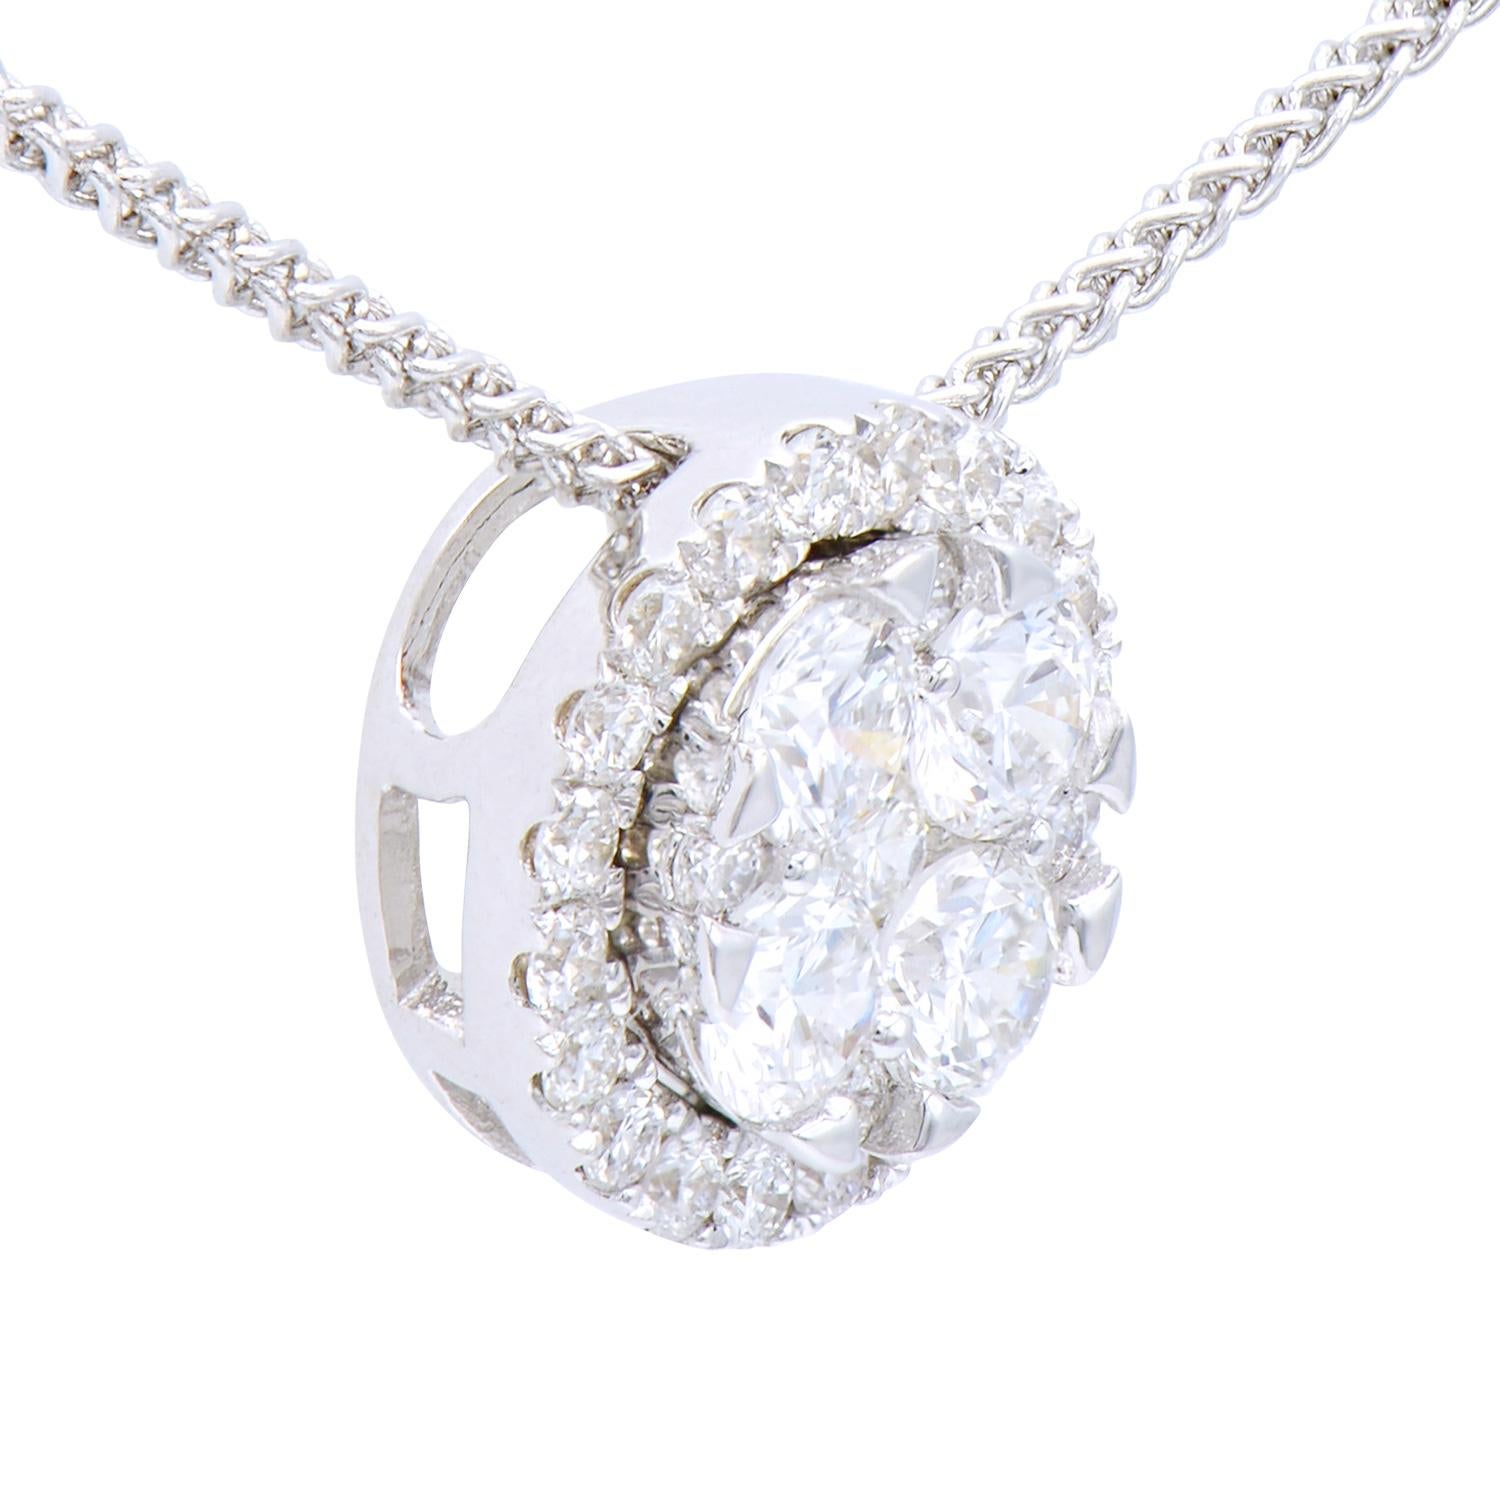 This beautiful circle pendant is made up of 4 diamonds of .35 carats surrounded by 25 round diamonds of 0.2 carats, all in VS2, G color. They are set in 1.0 gram of 18 karat white gold with a 18 karat chain as well. This classic look is timeless and